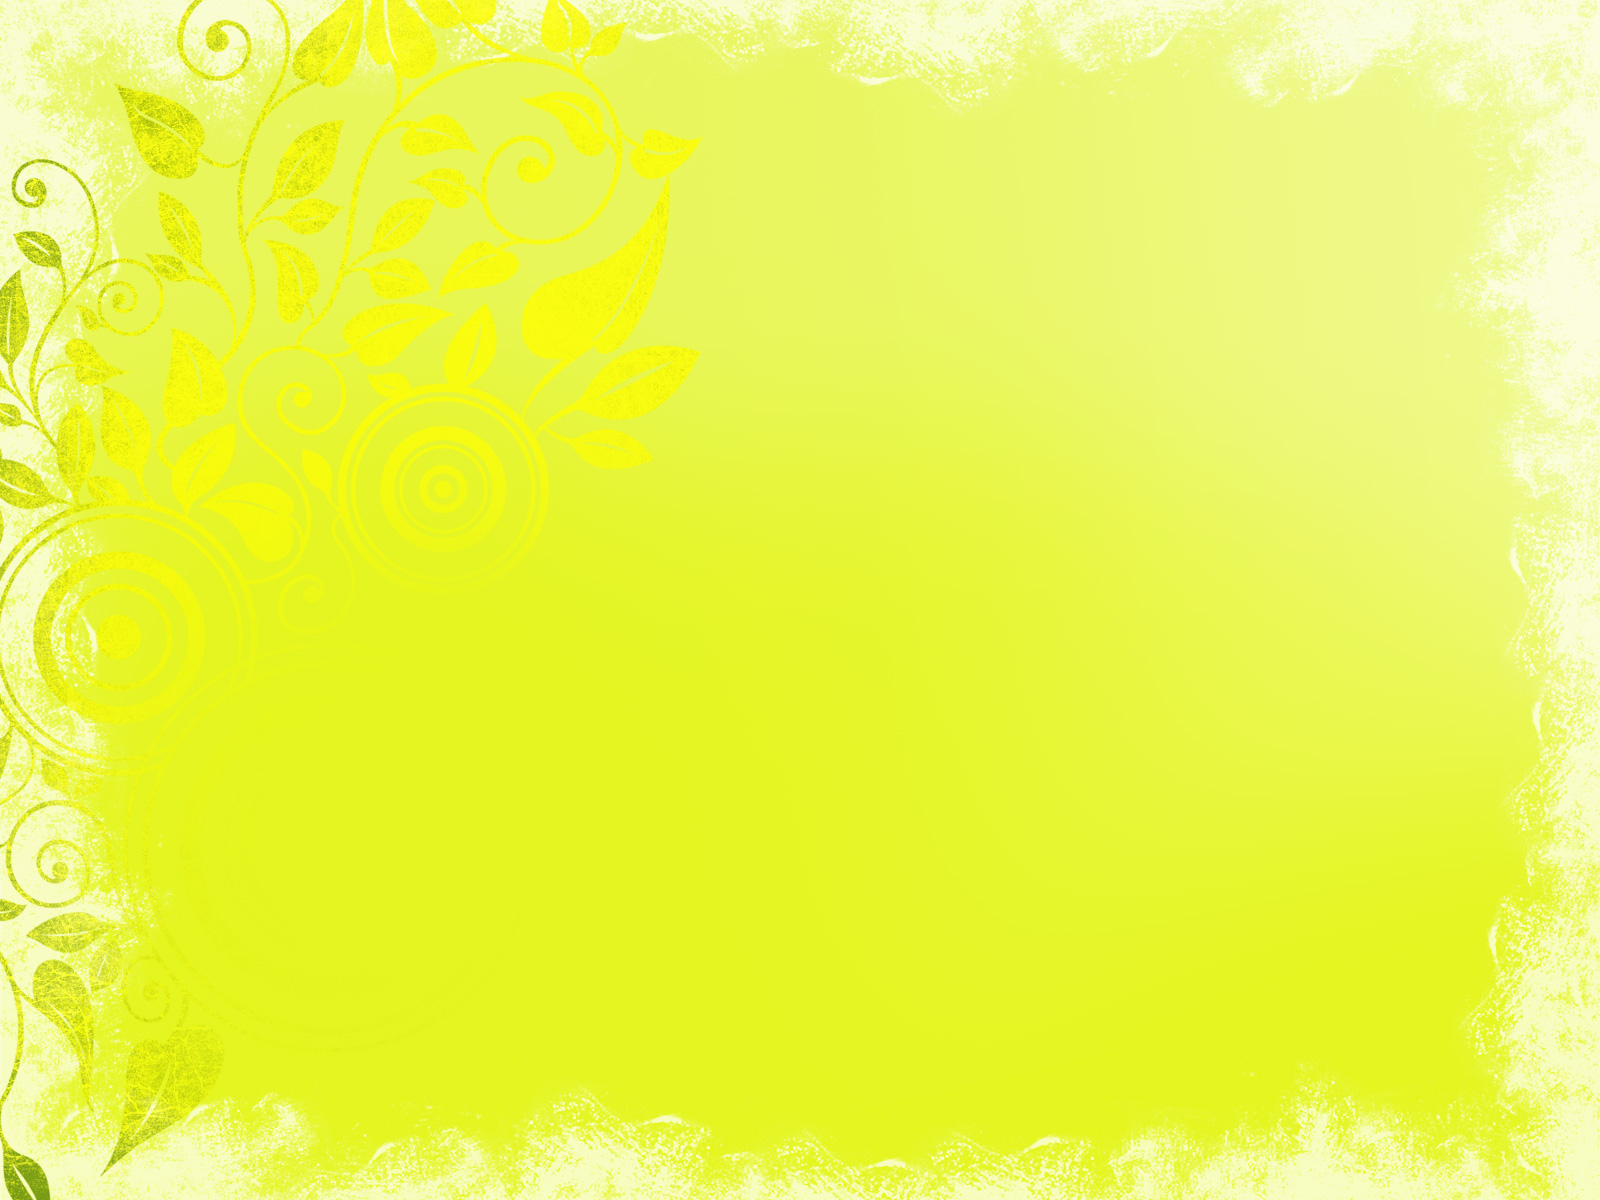  PPT Background Yellow Ornament ppt backgrounds Yellow Ornament PPT